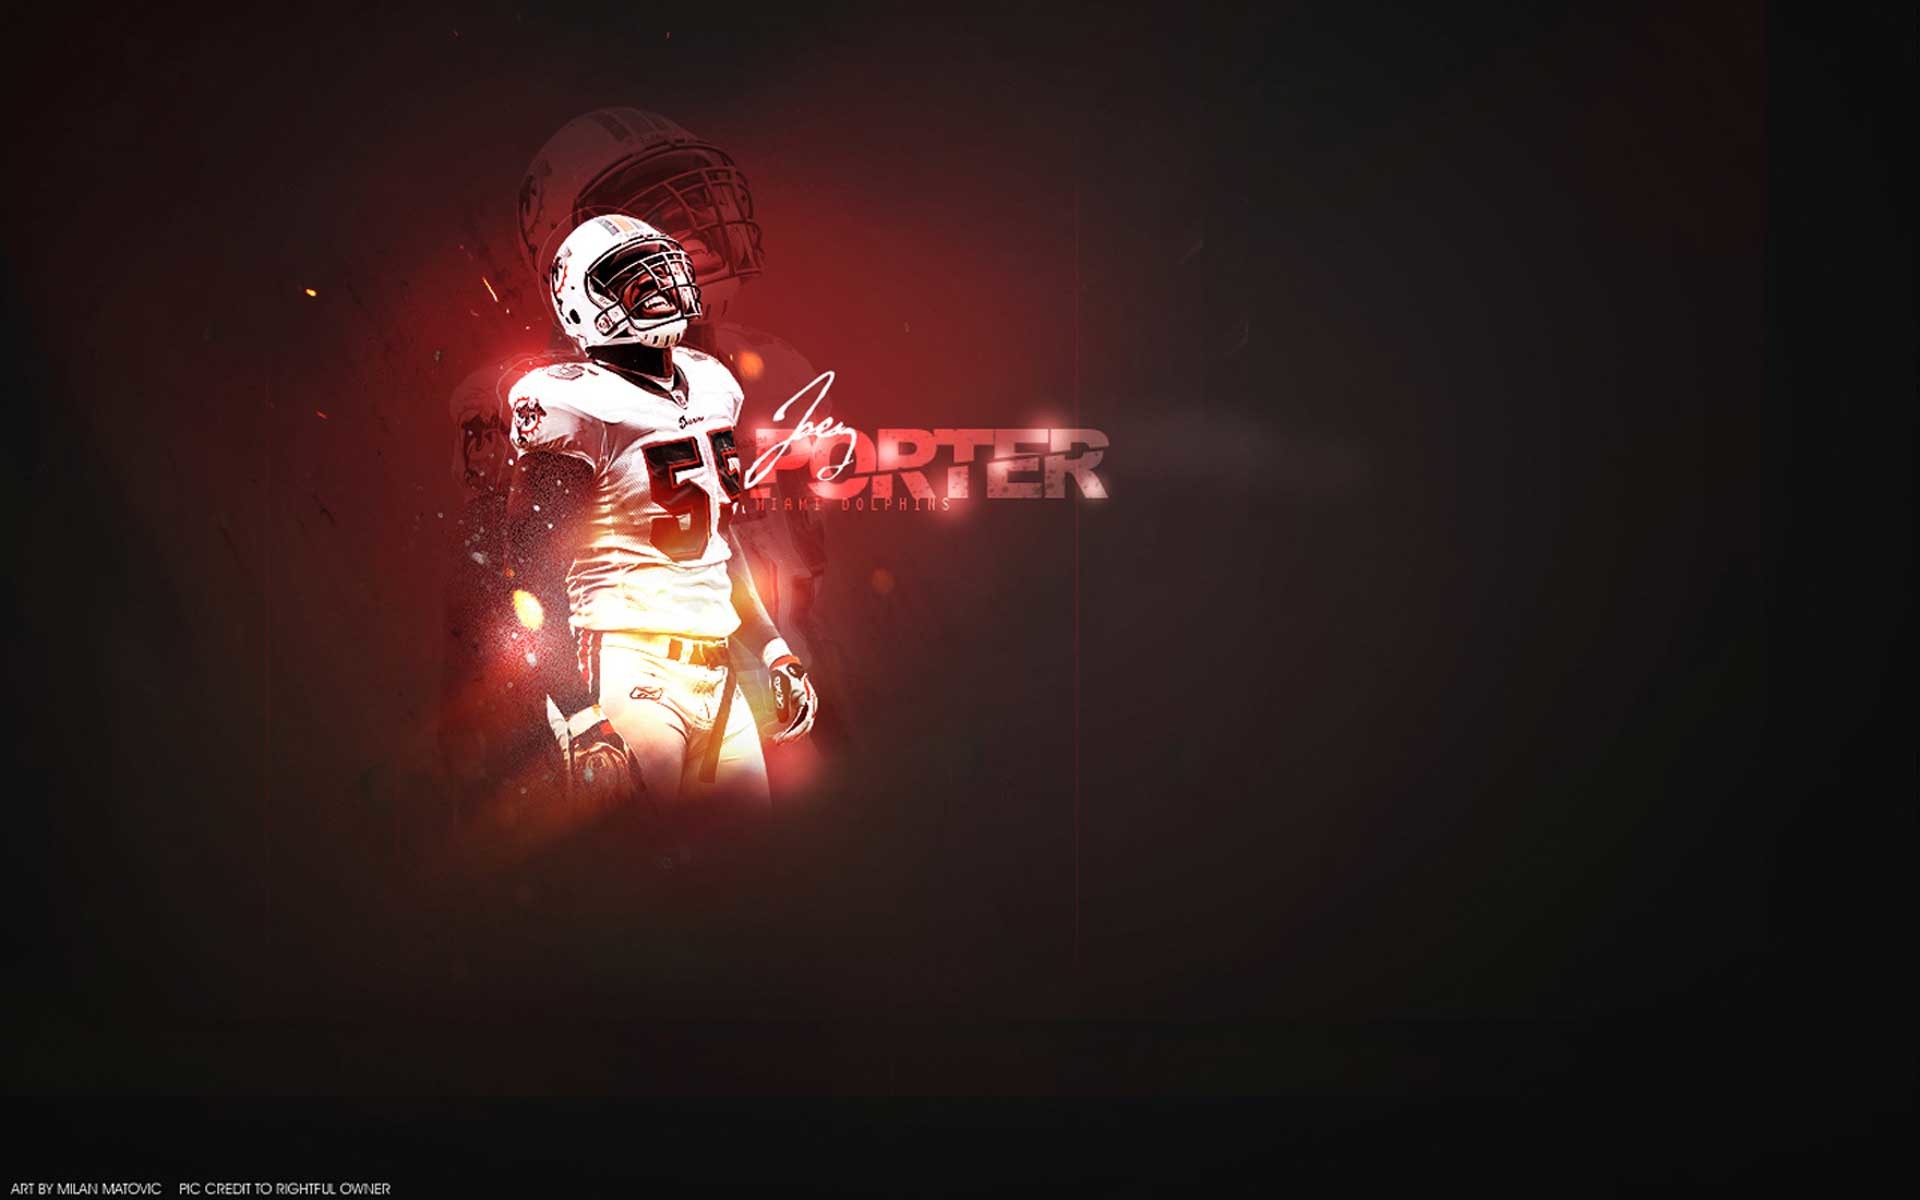 1920x1200 ... Download The Best Hd College Football Wallpapers Wallpaper Desktop  Background Full Screen HD We Try to